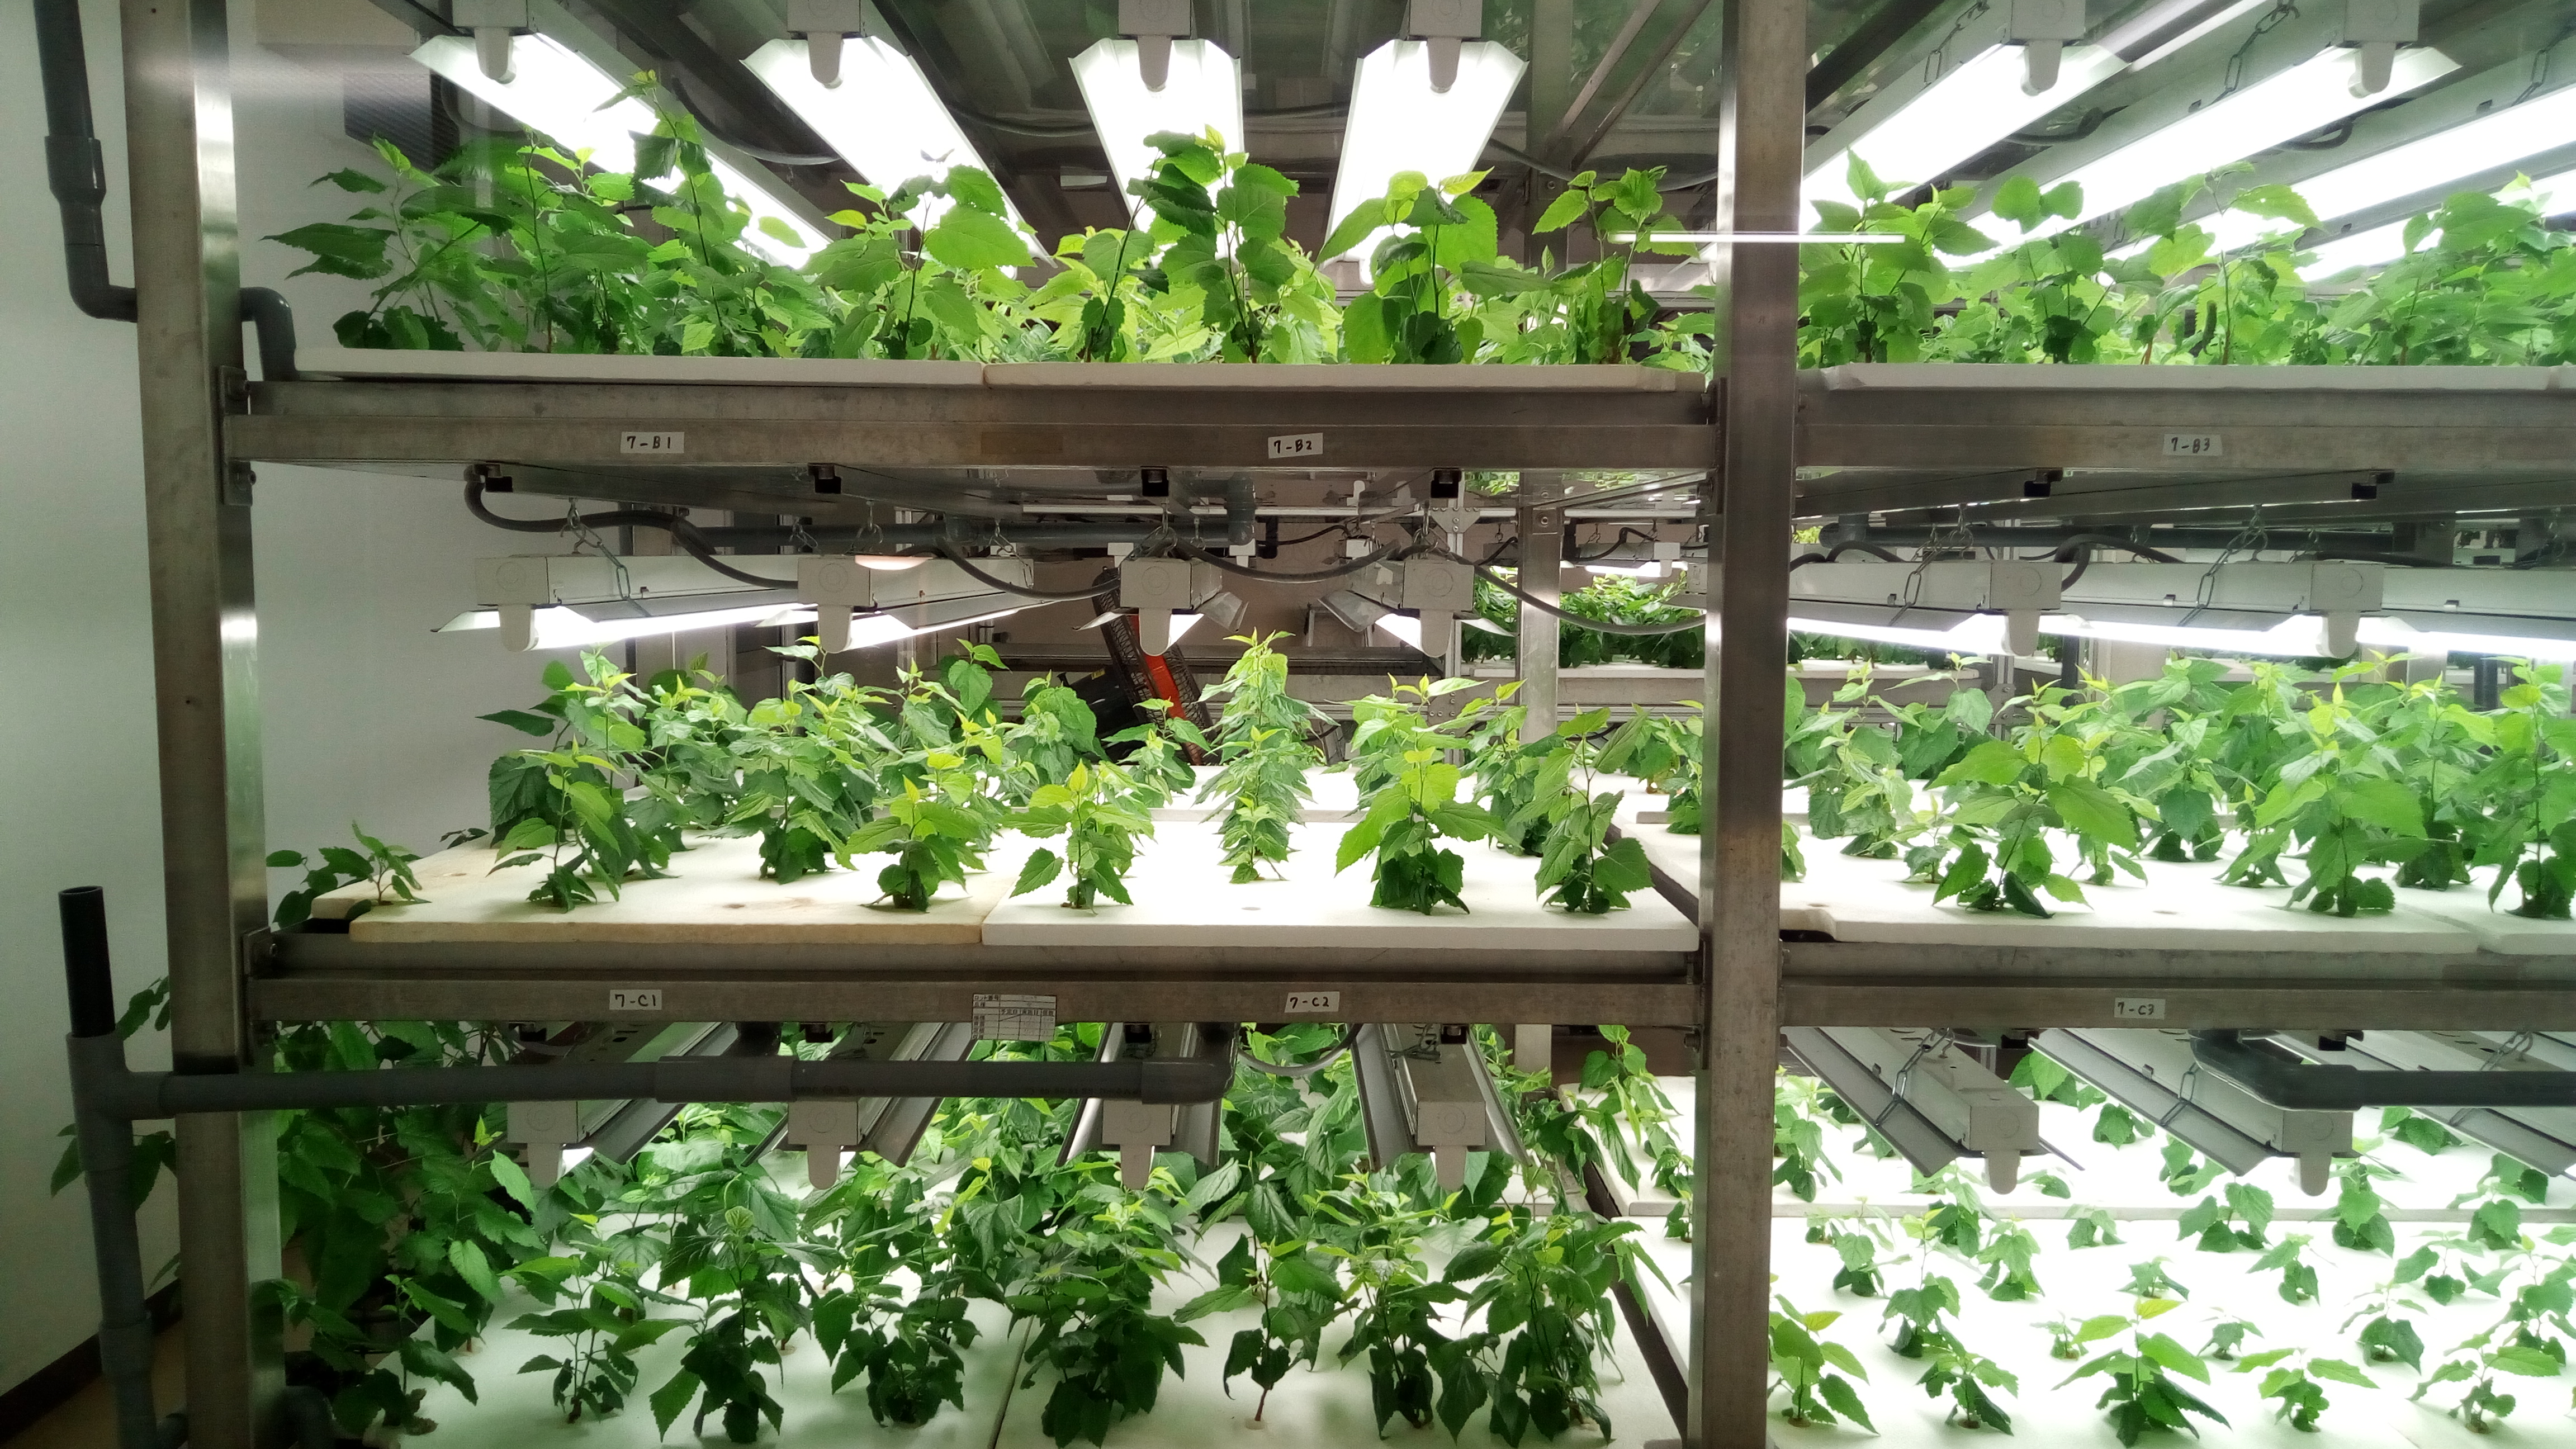 Shelves of plants under florescent lights. Each plant's shoot system emerges from an opening, under which the roots are bathed in a nutrient solution.